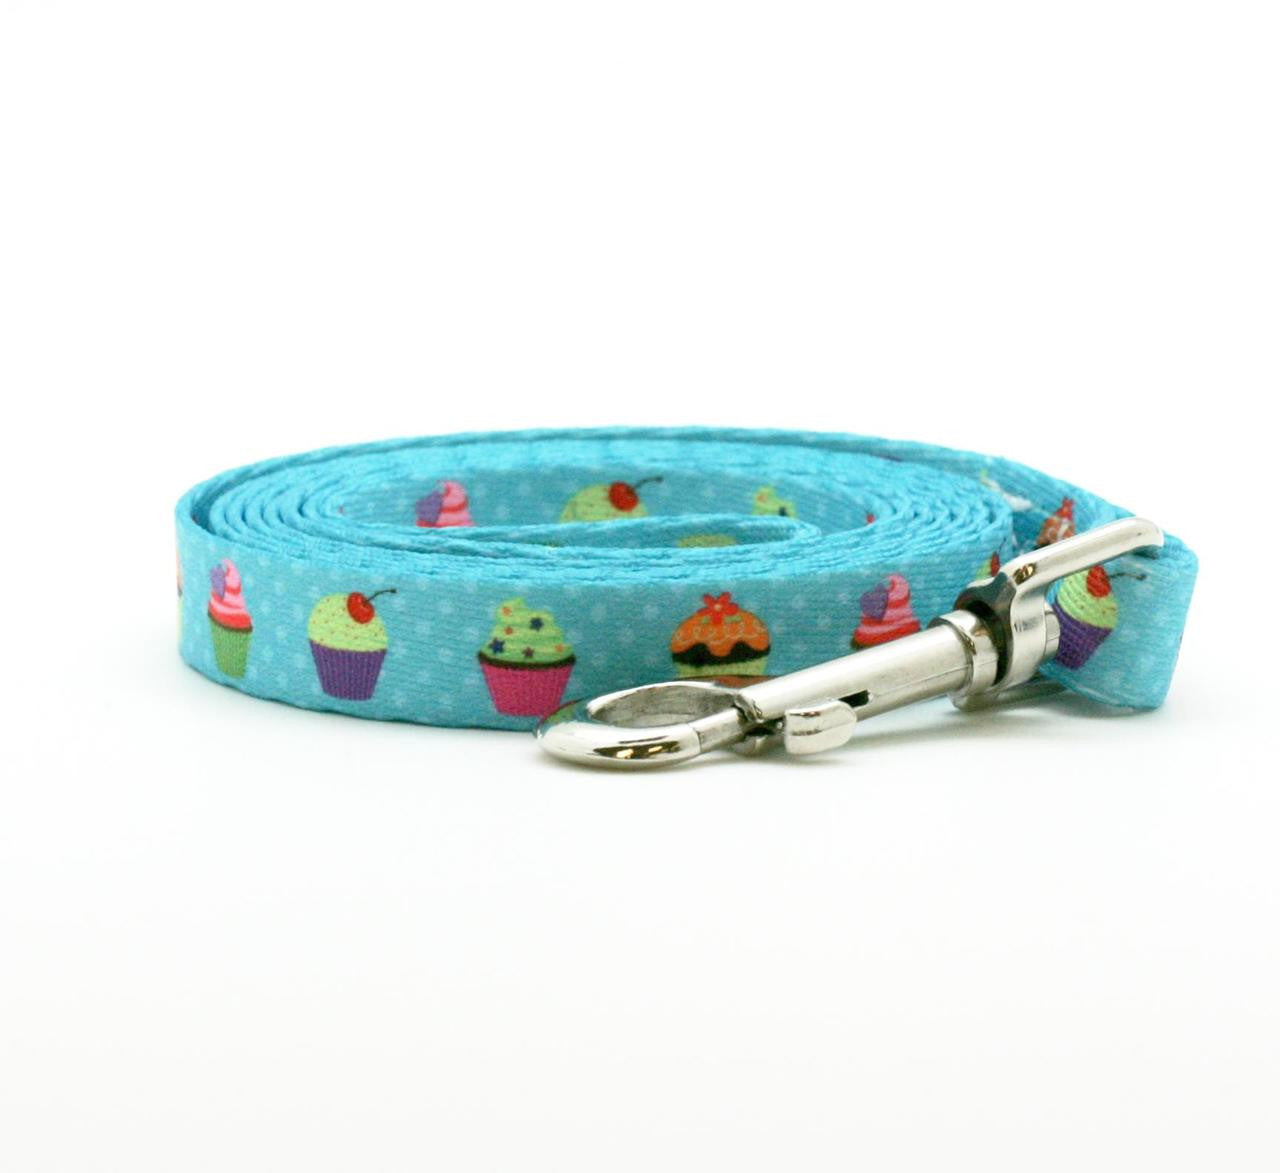 Dog leash Cupcakes with polka dots on 5/8" turquoise webbing